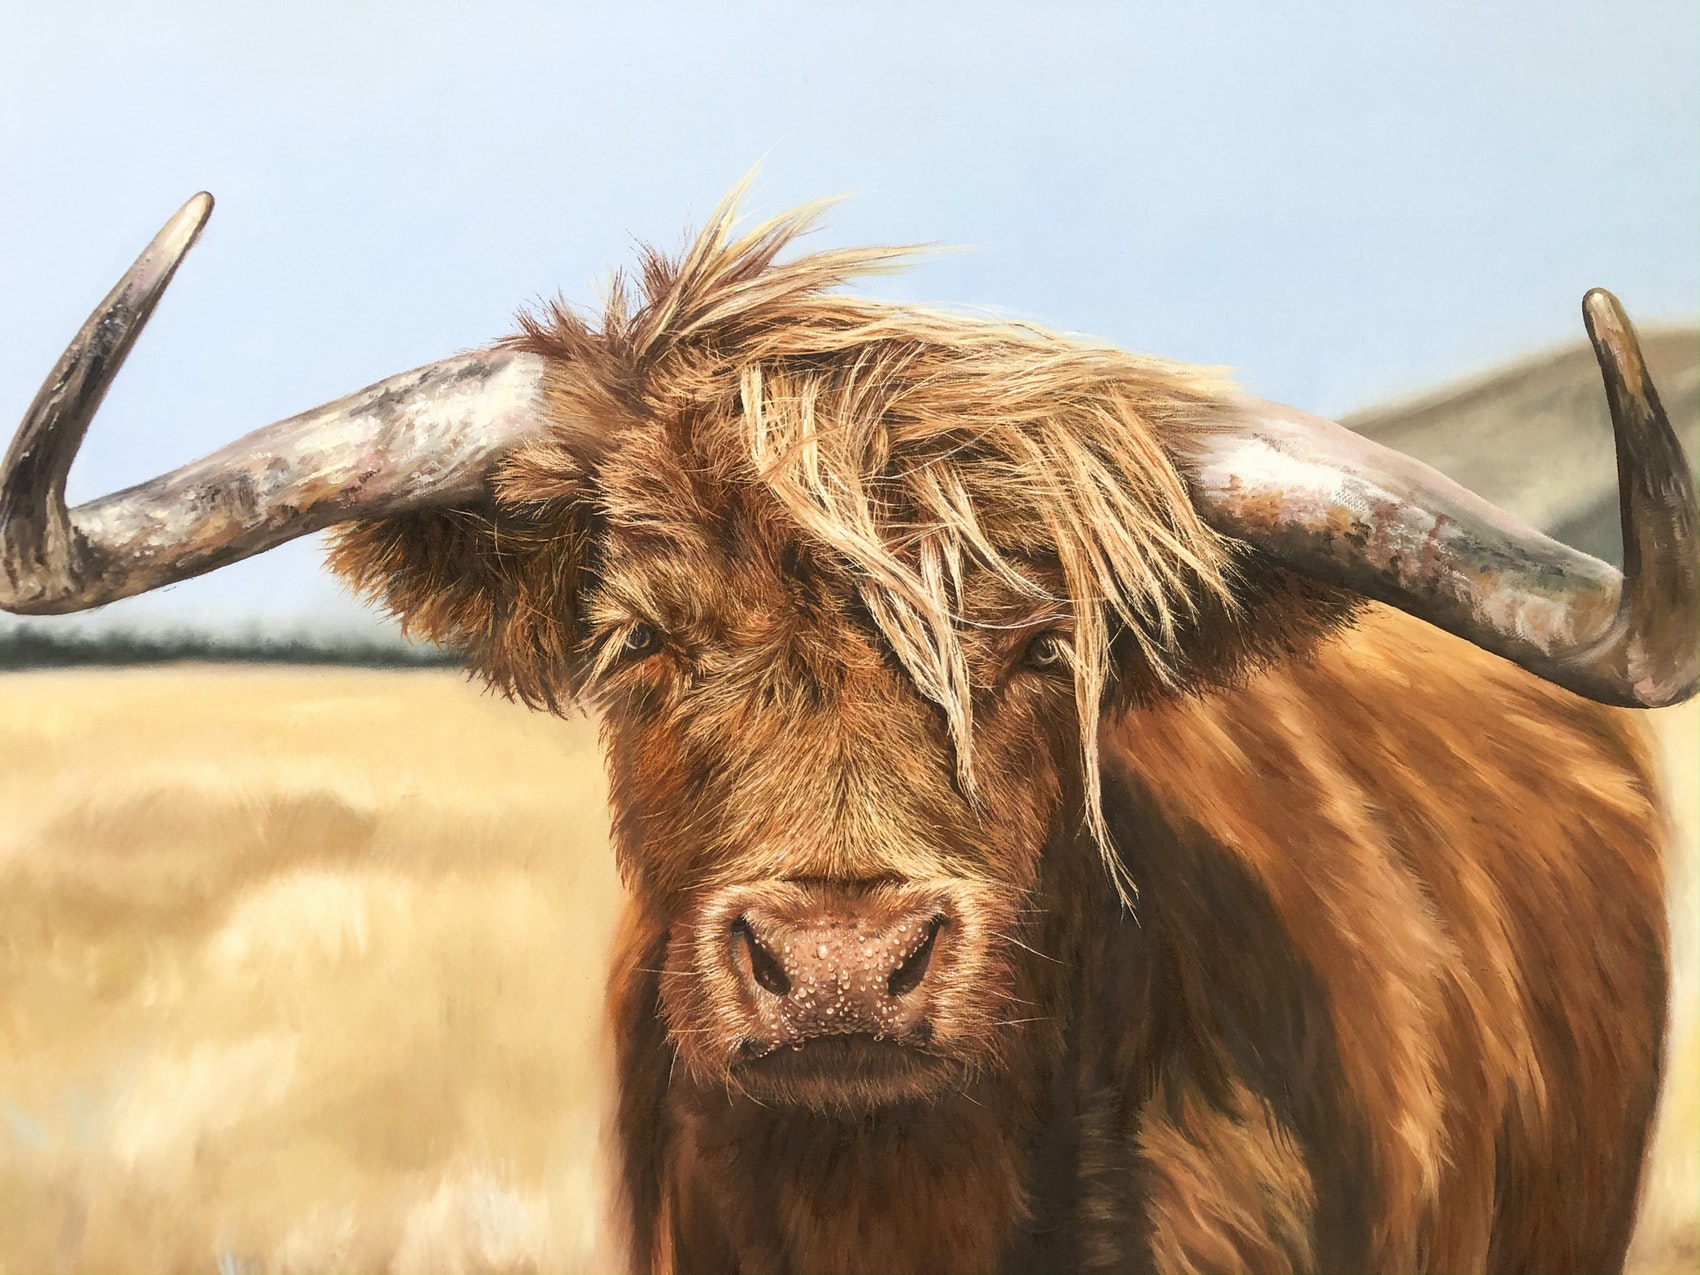 'Murphey the Highland Cow' (print) by Brittany Dixon. A realistic animal portrait of a cow. Art.